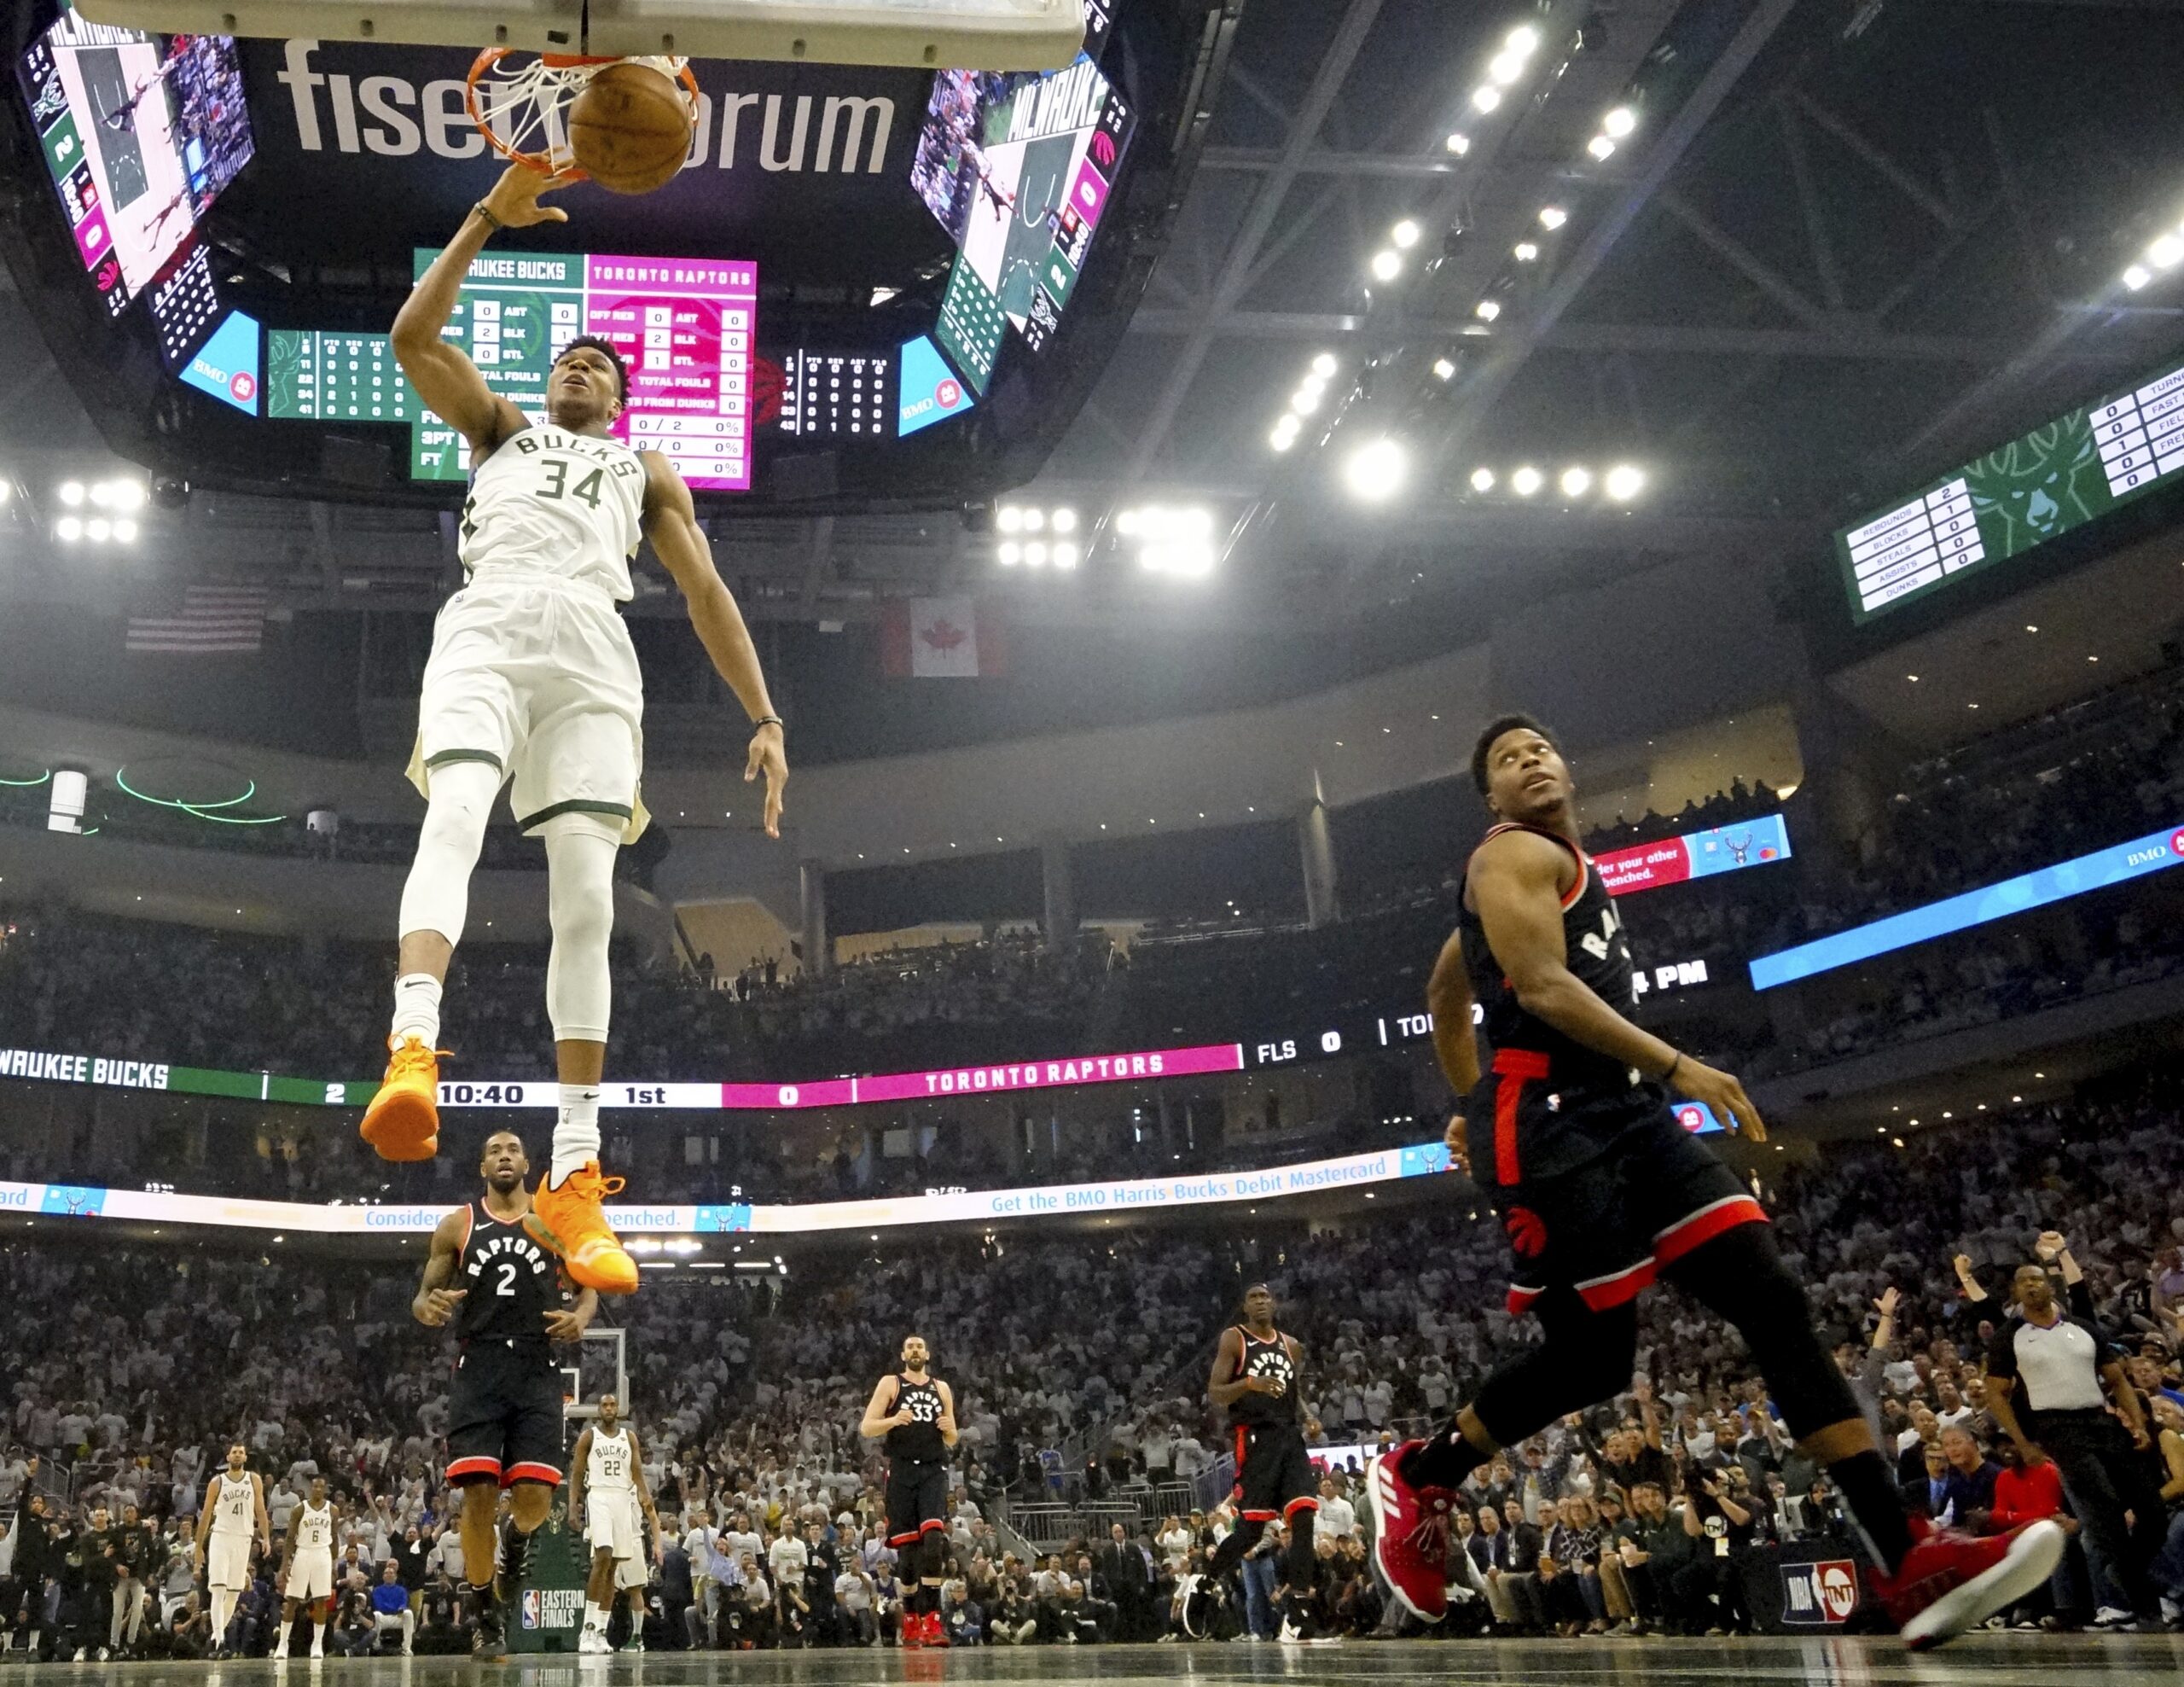 Bucks Win First Game In Eastern Conference Championship Game, Leaving Fans To Hope For More